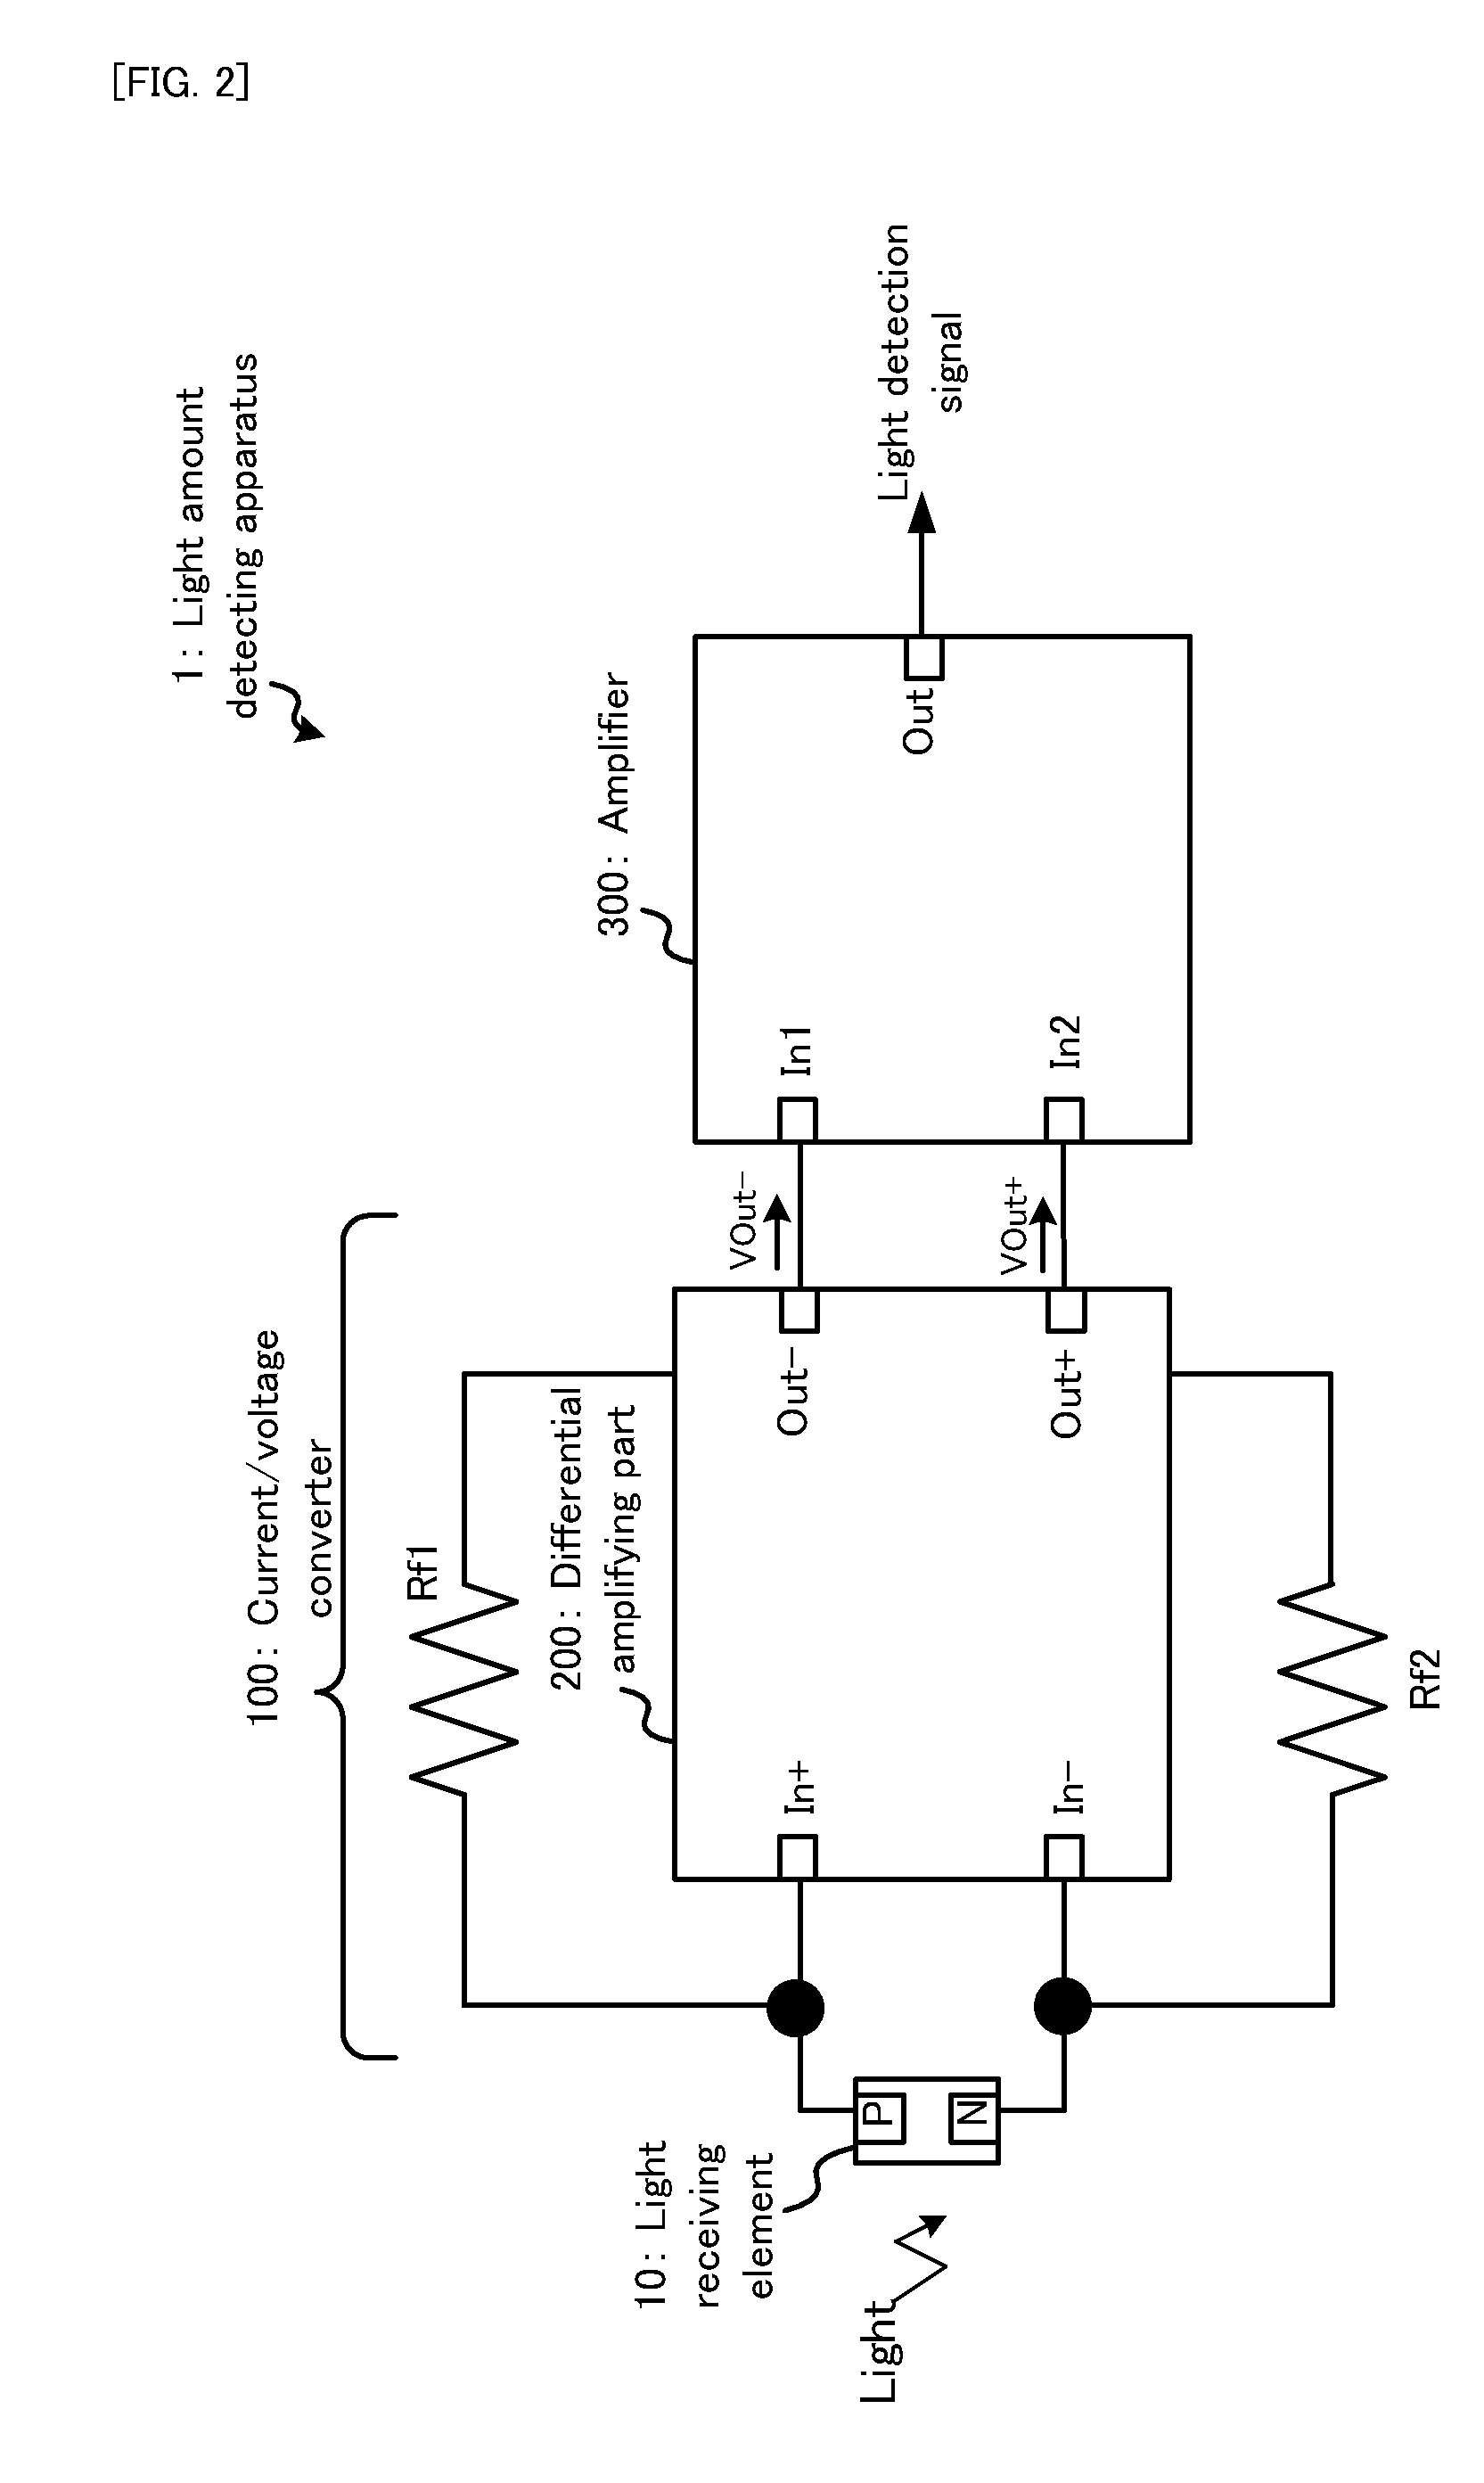 Light amount detecting apparatus, and light amount information processing apparatus